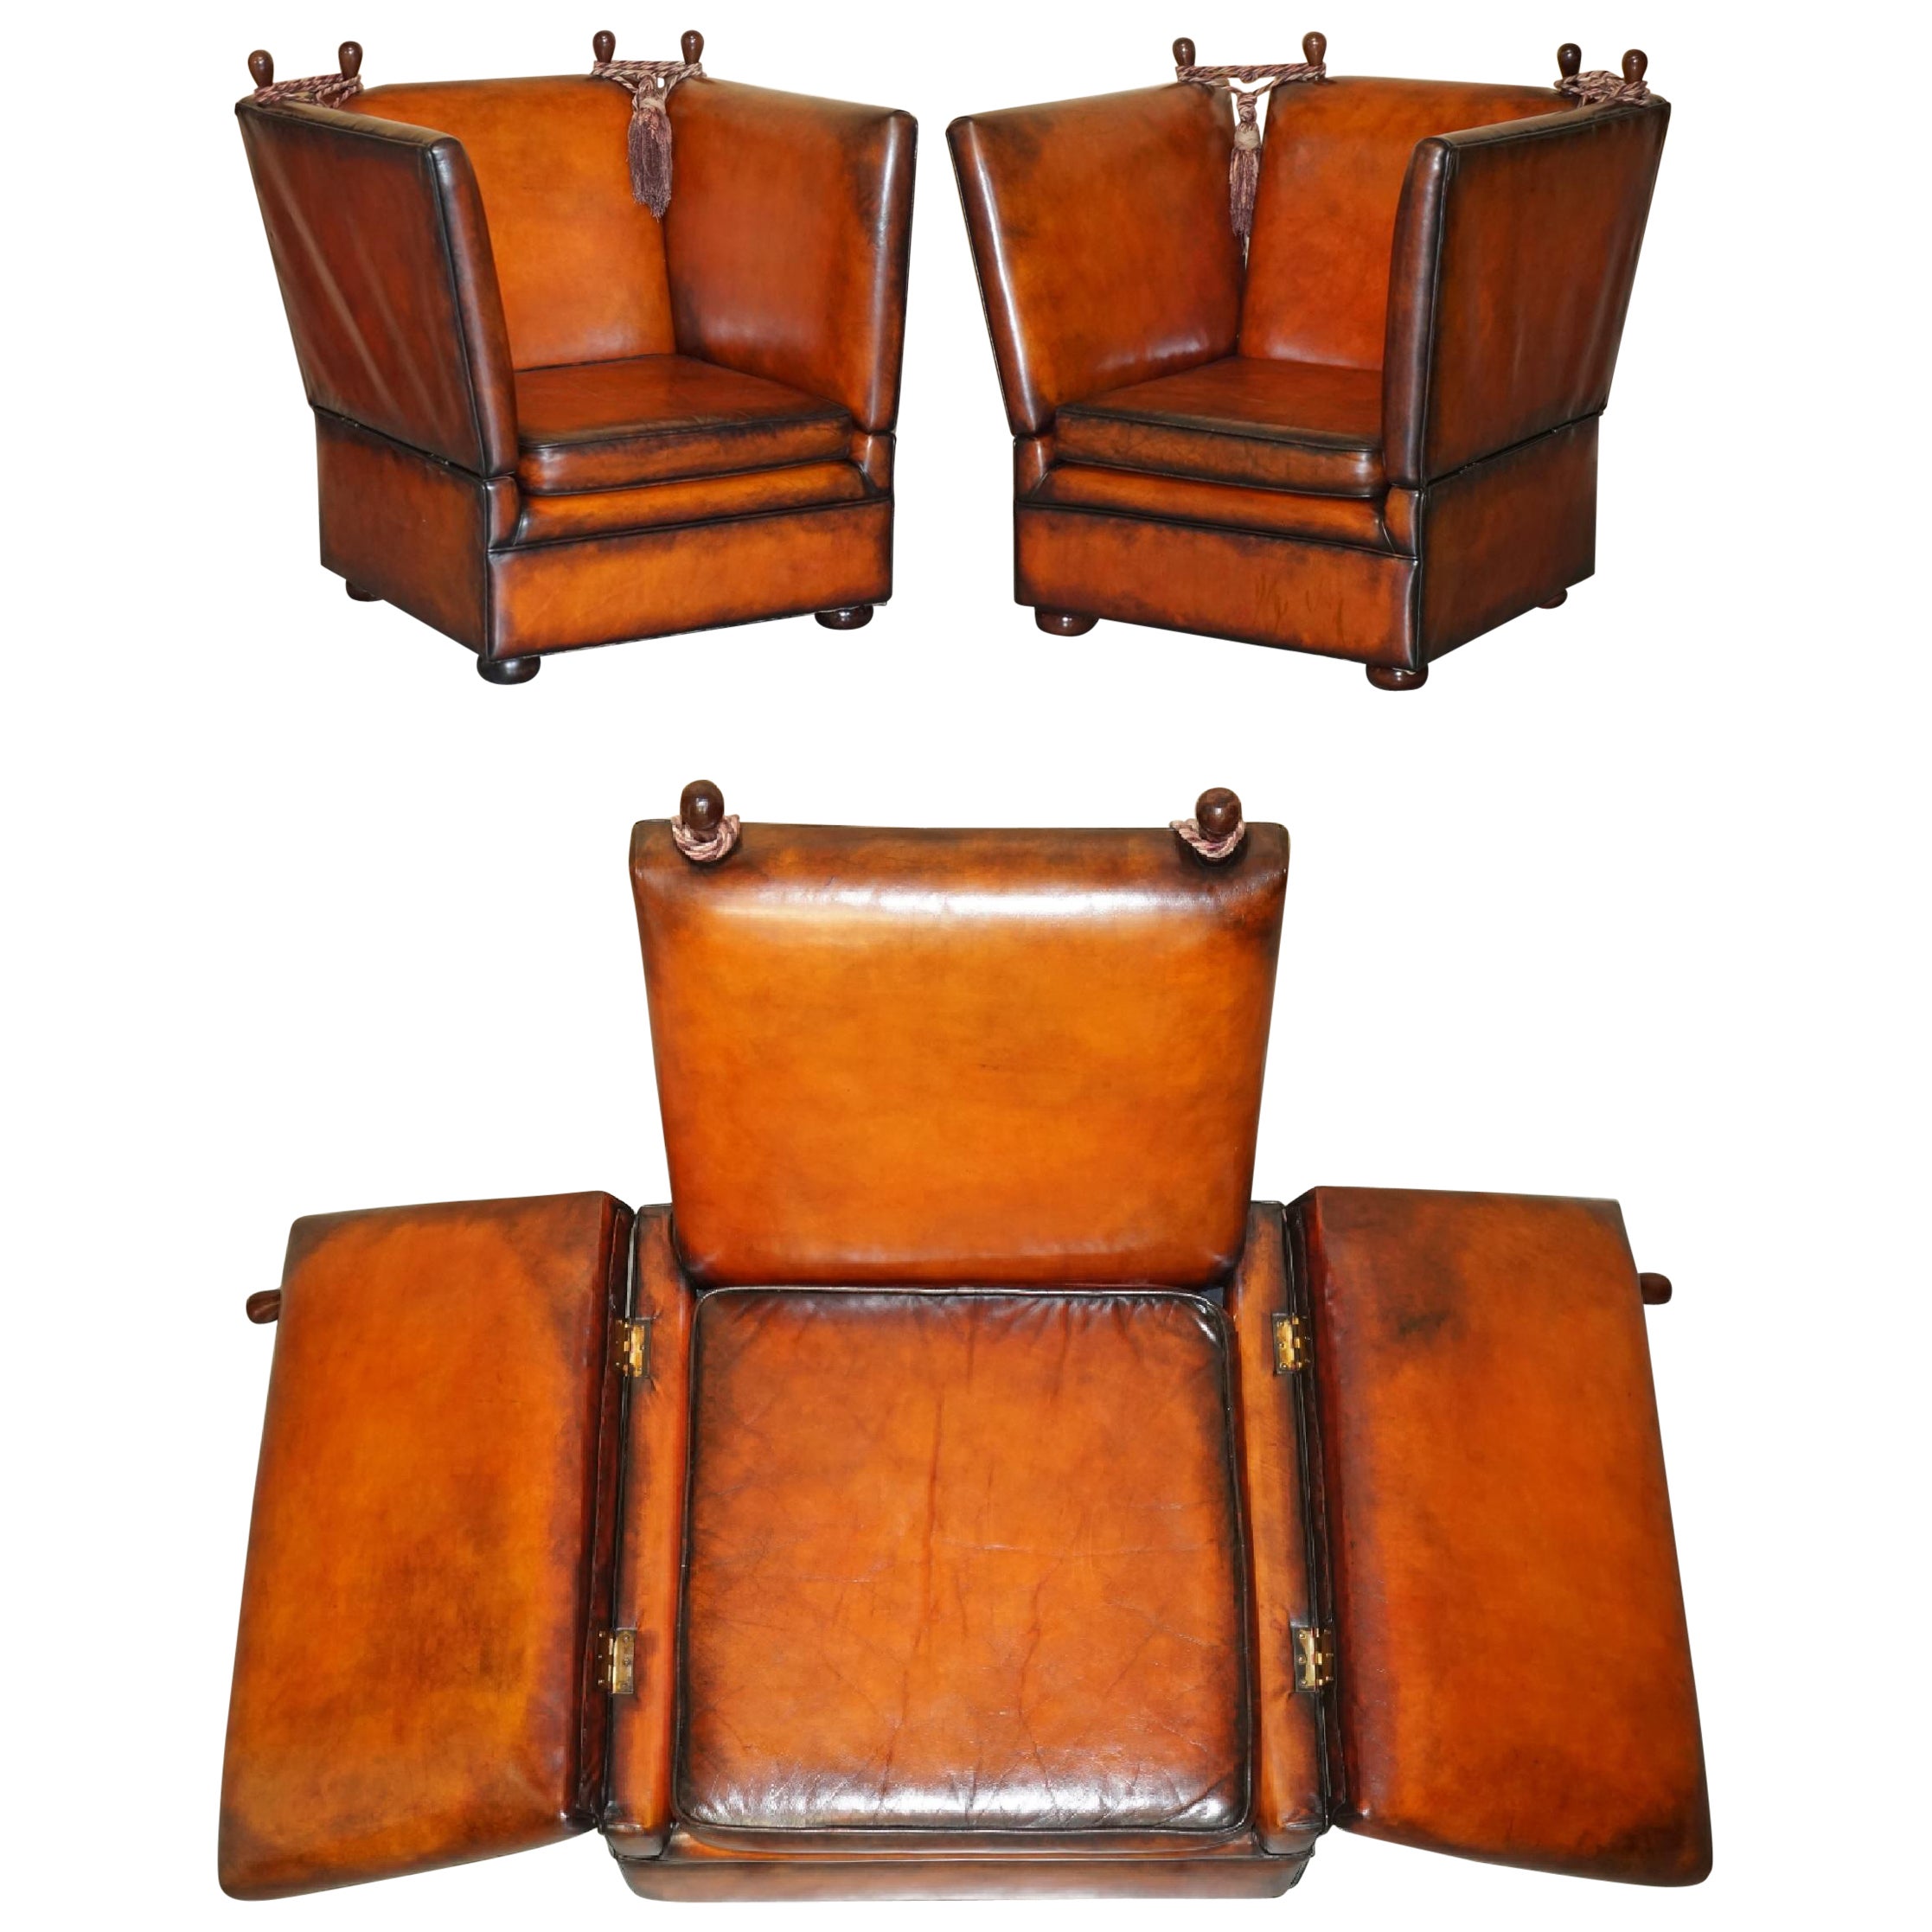 UNIQUE PAIR OF ENGLISH FULLY RESTORED KNOLL DROP ARM BROWN LEATHER ARMCHAIRs